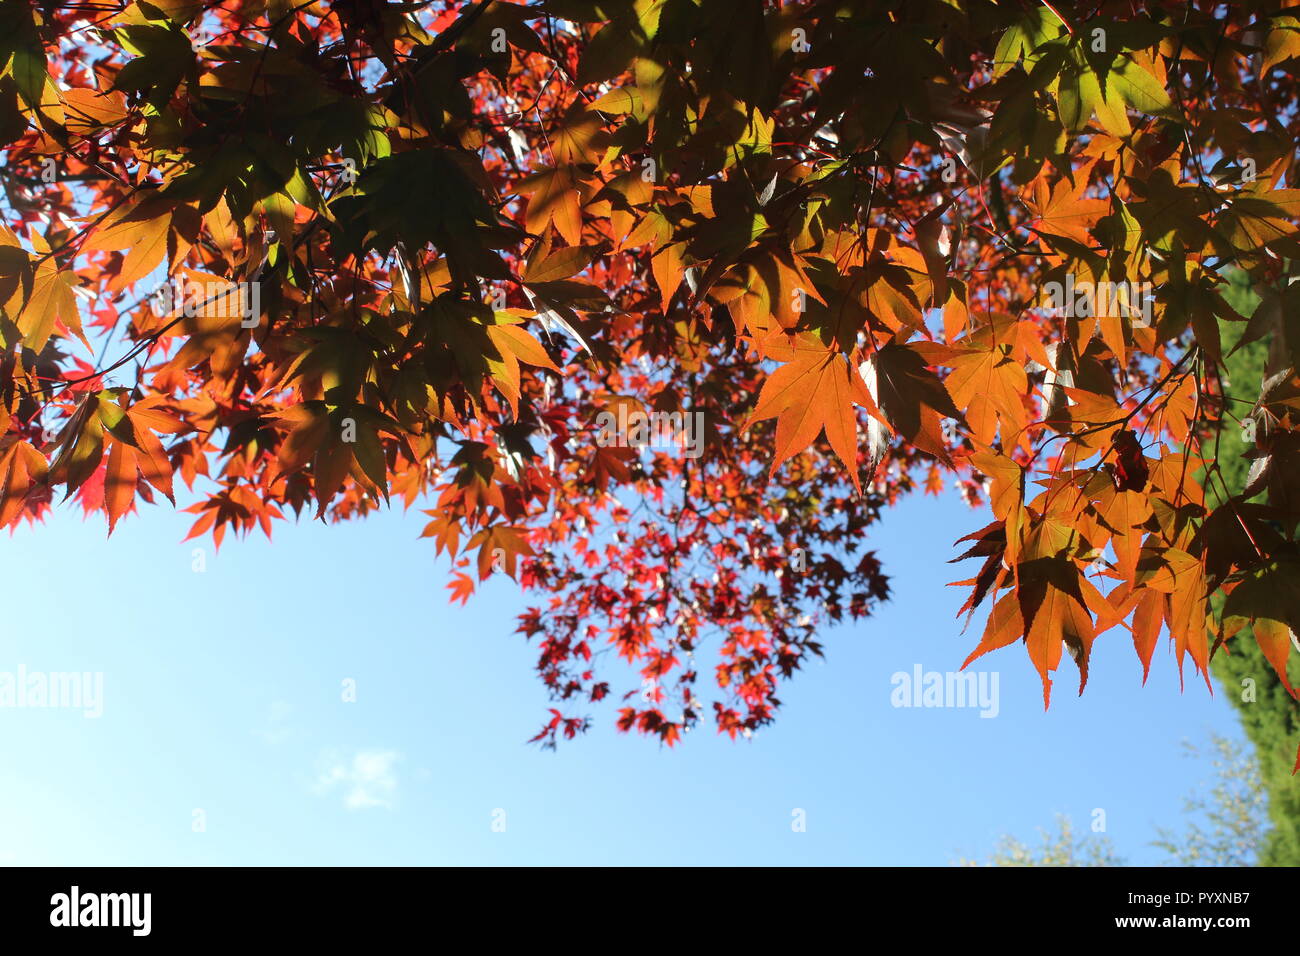 Autumnal trees with orange, red and green leaves Stock Photo